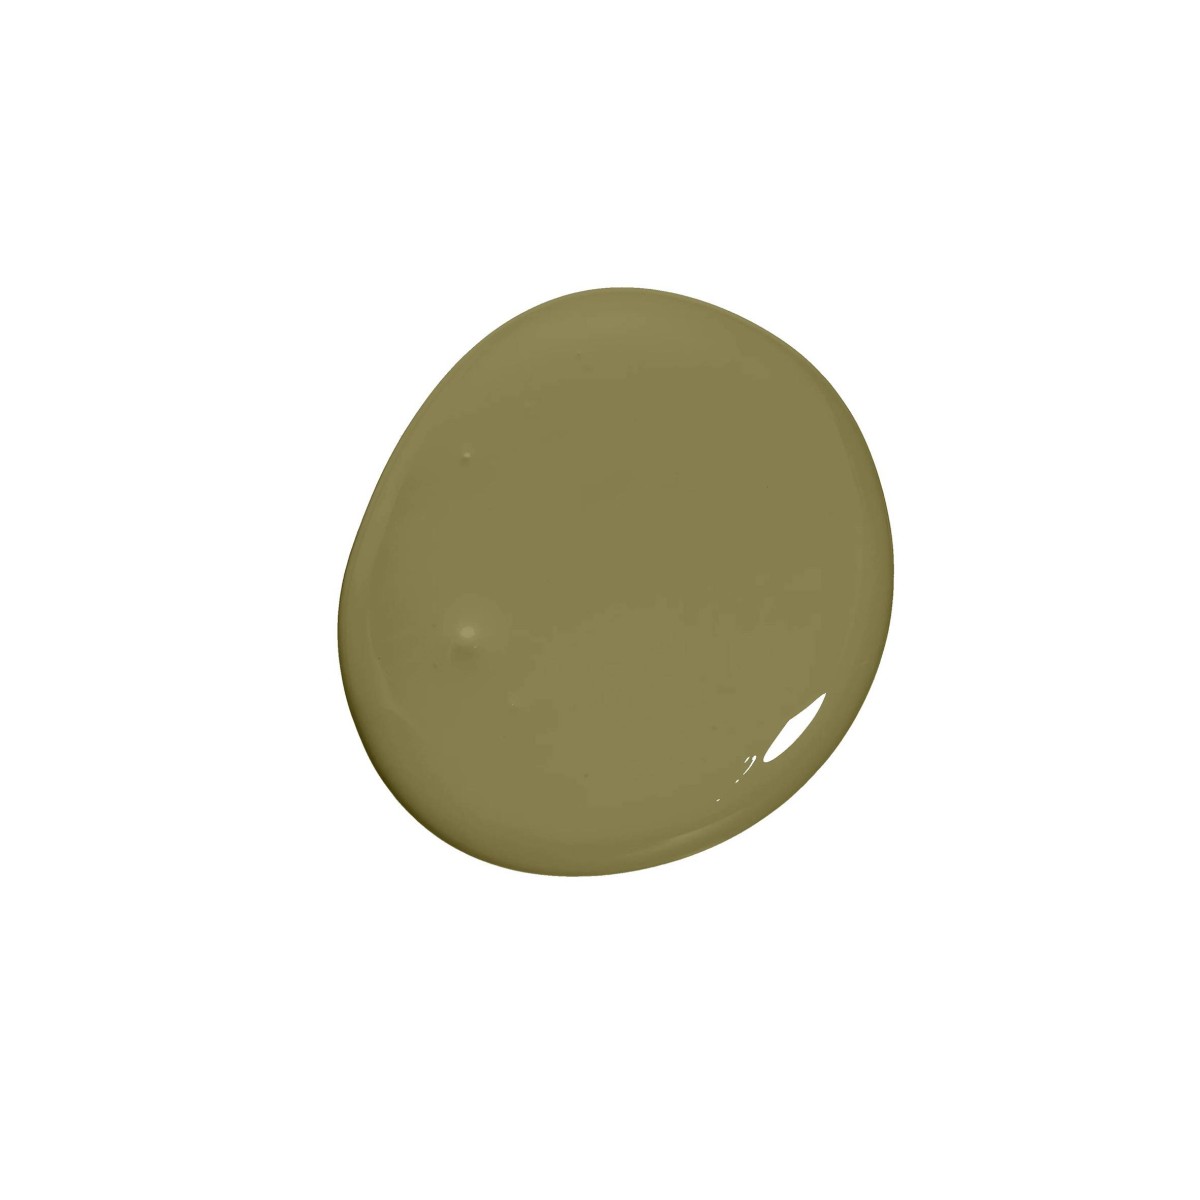 No. 1 Korea Paint Brand in Singapore - Noroo Paint - Olive Green Color